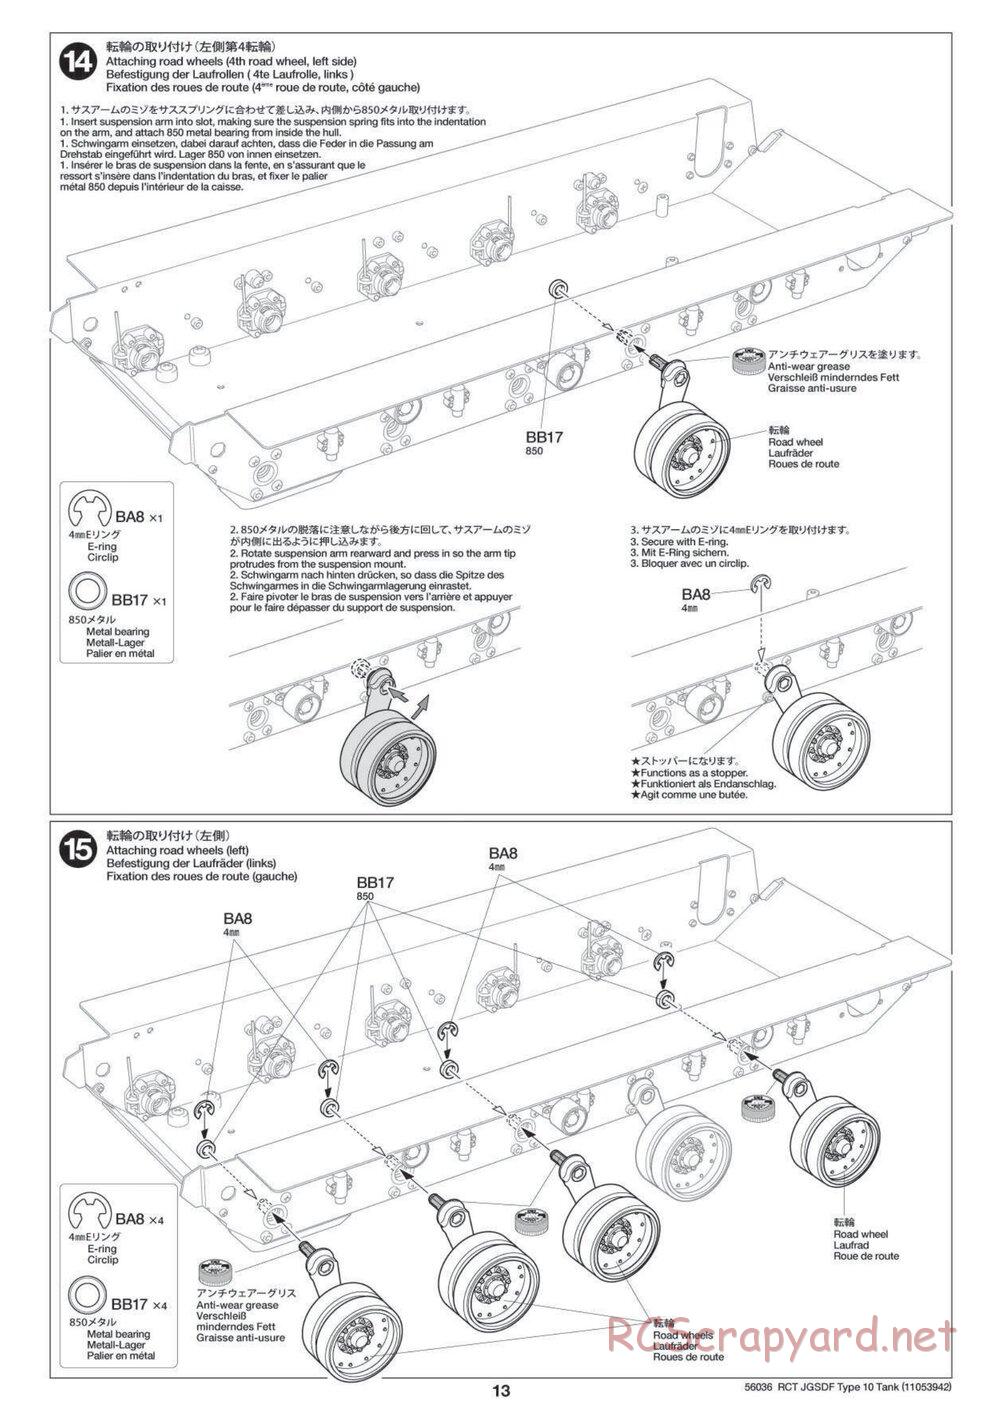 Tamiya - JGSDF Type 10 Tank - 1/16 Scale Chassis - Manual - Page 13